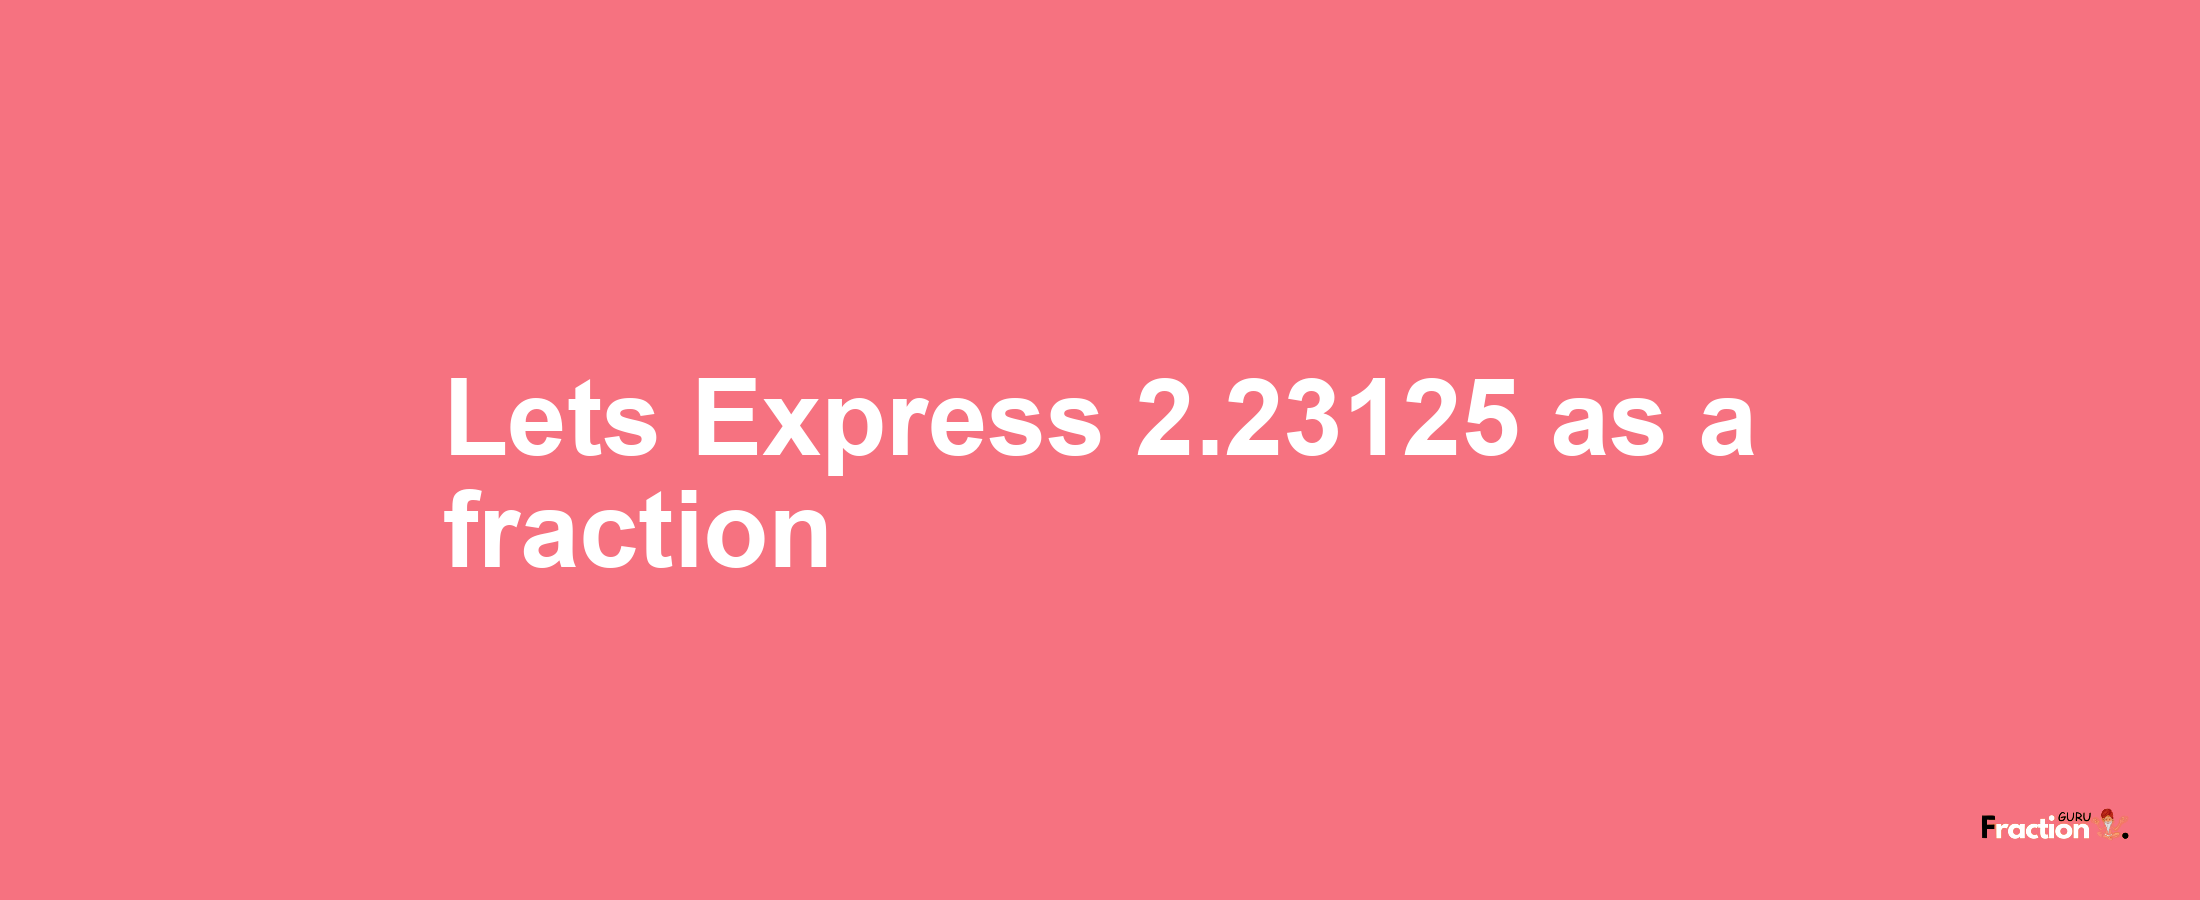 Lets Express 2.23125 as afraction